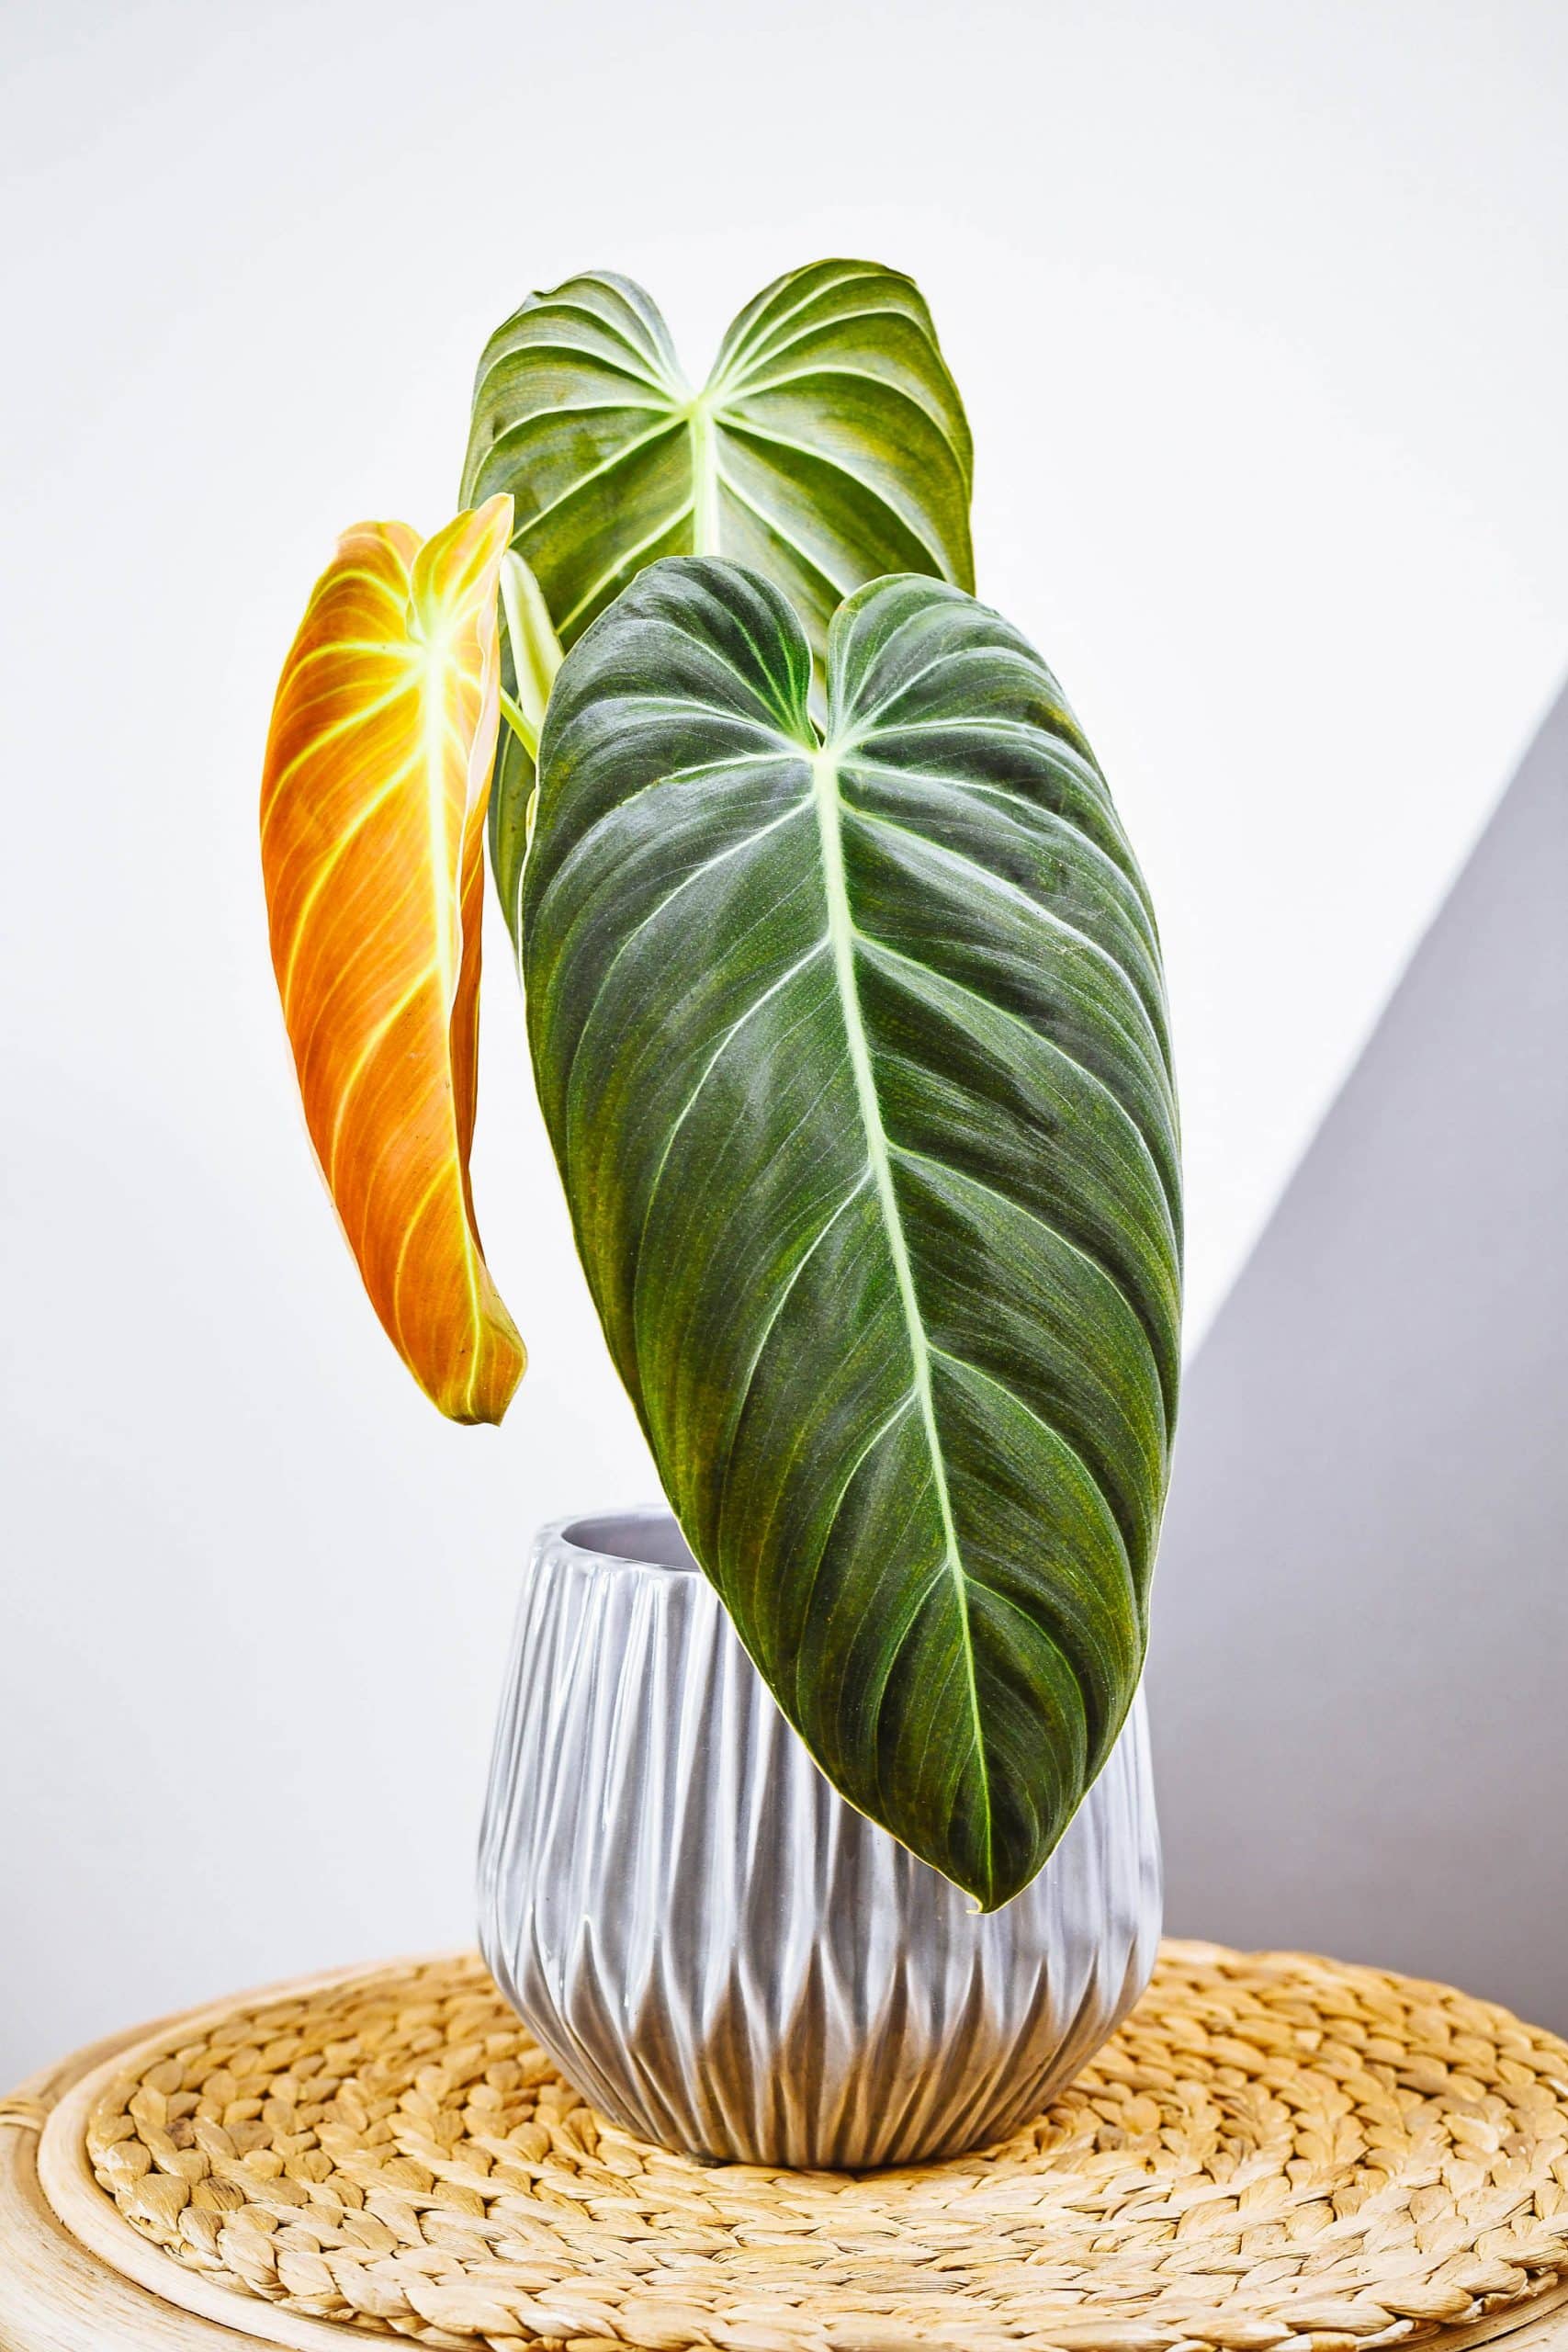 Black Gold Philodendron houseplant in a gray ceramic pot, with two large green leaves and a new reddish leaf emerging